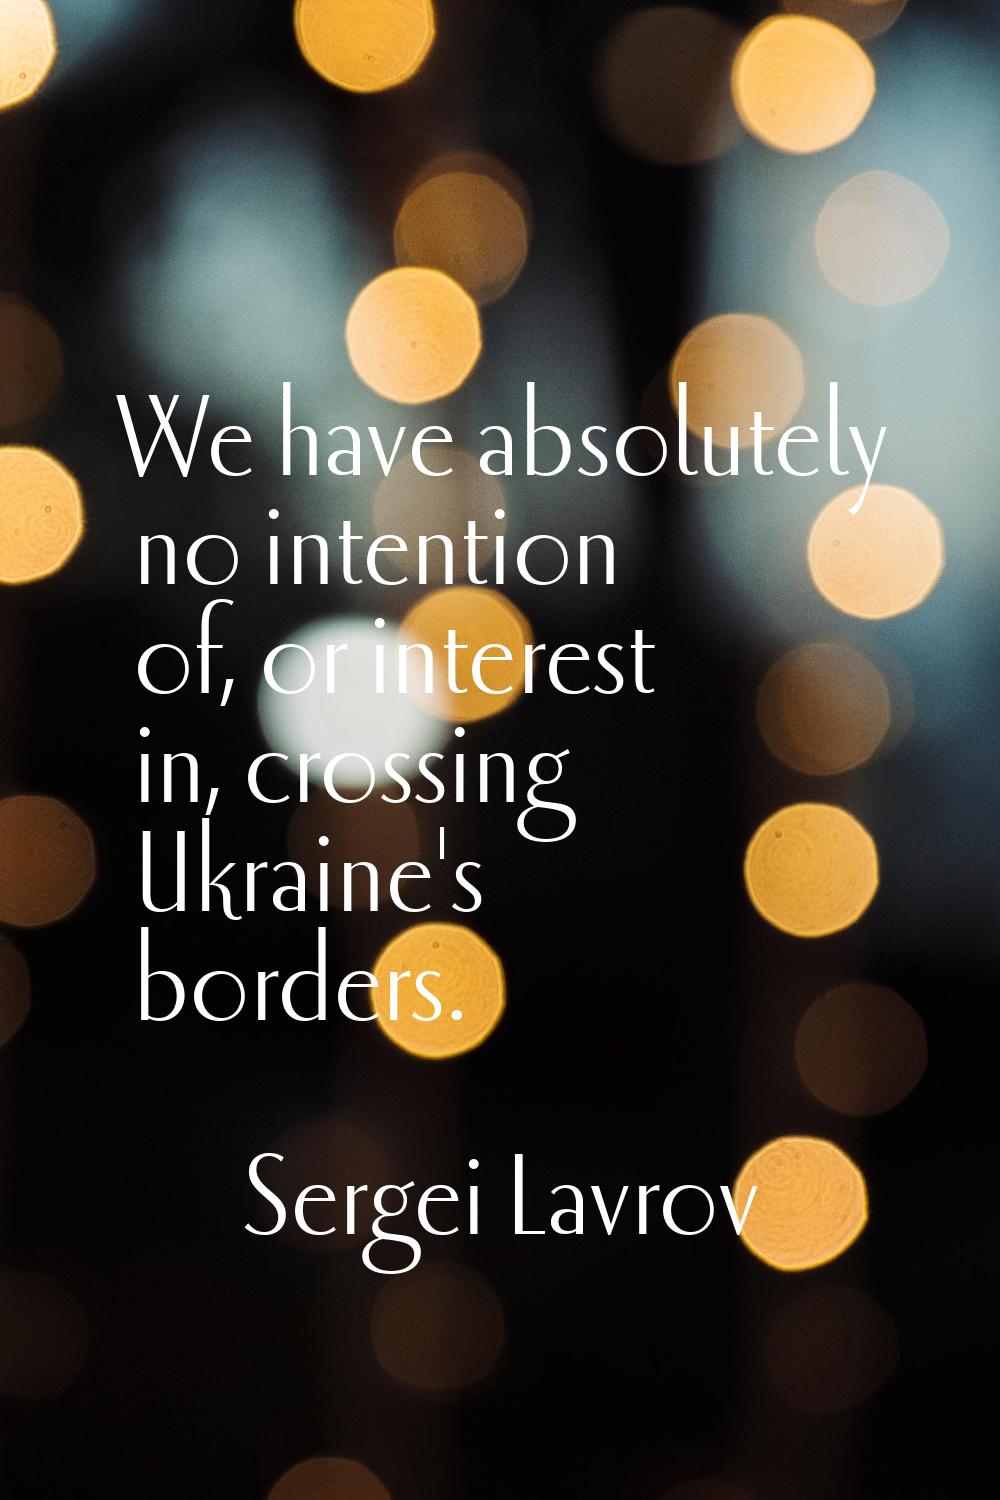 We have absolutely no intention of, or interest in, crossing Ukraine's borders.